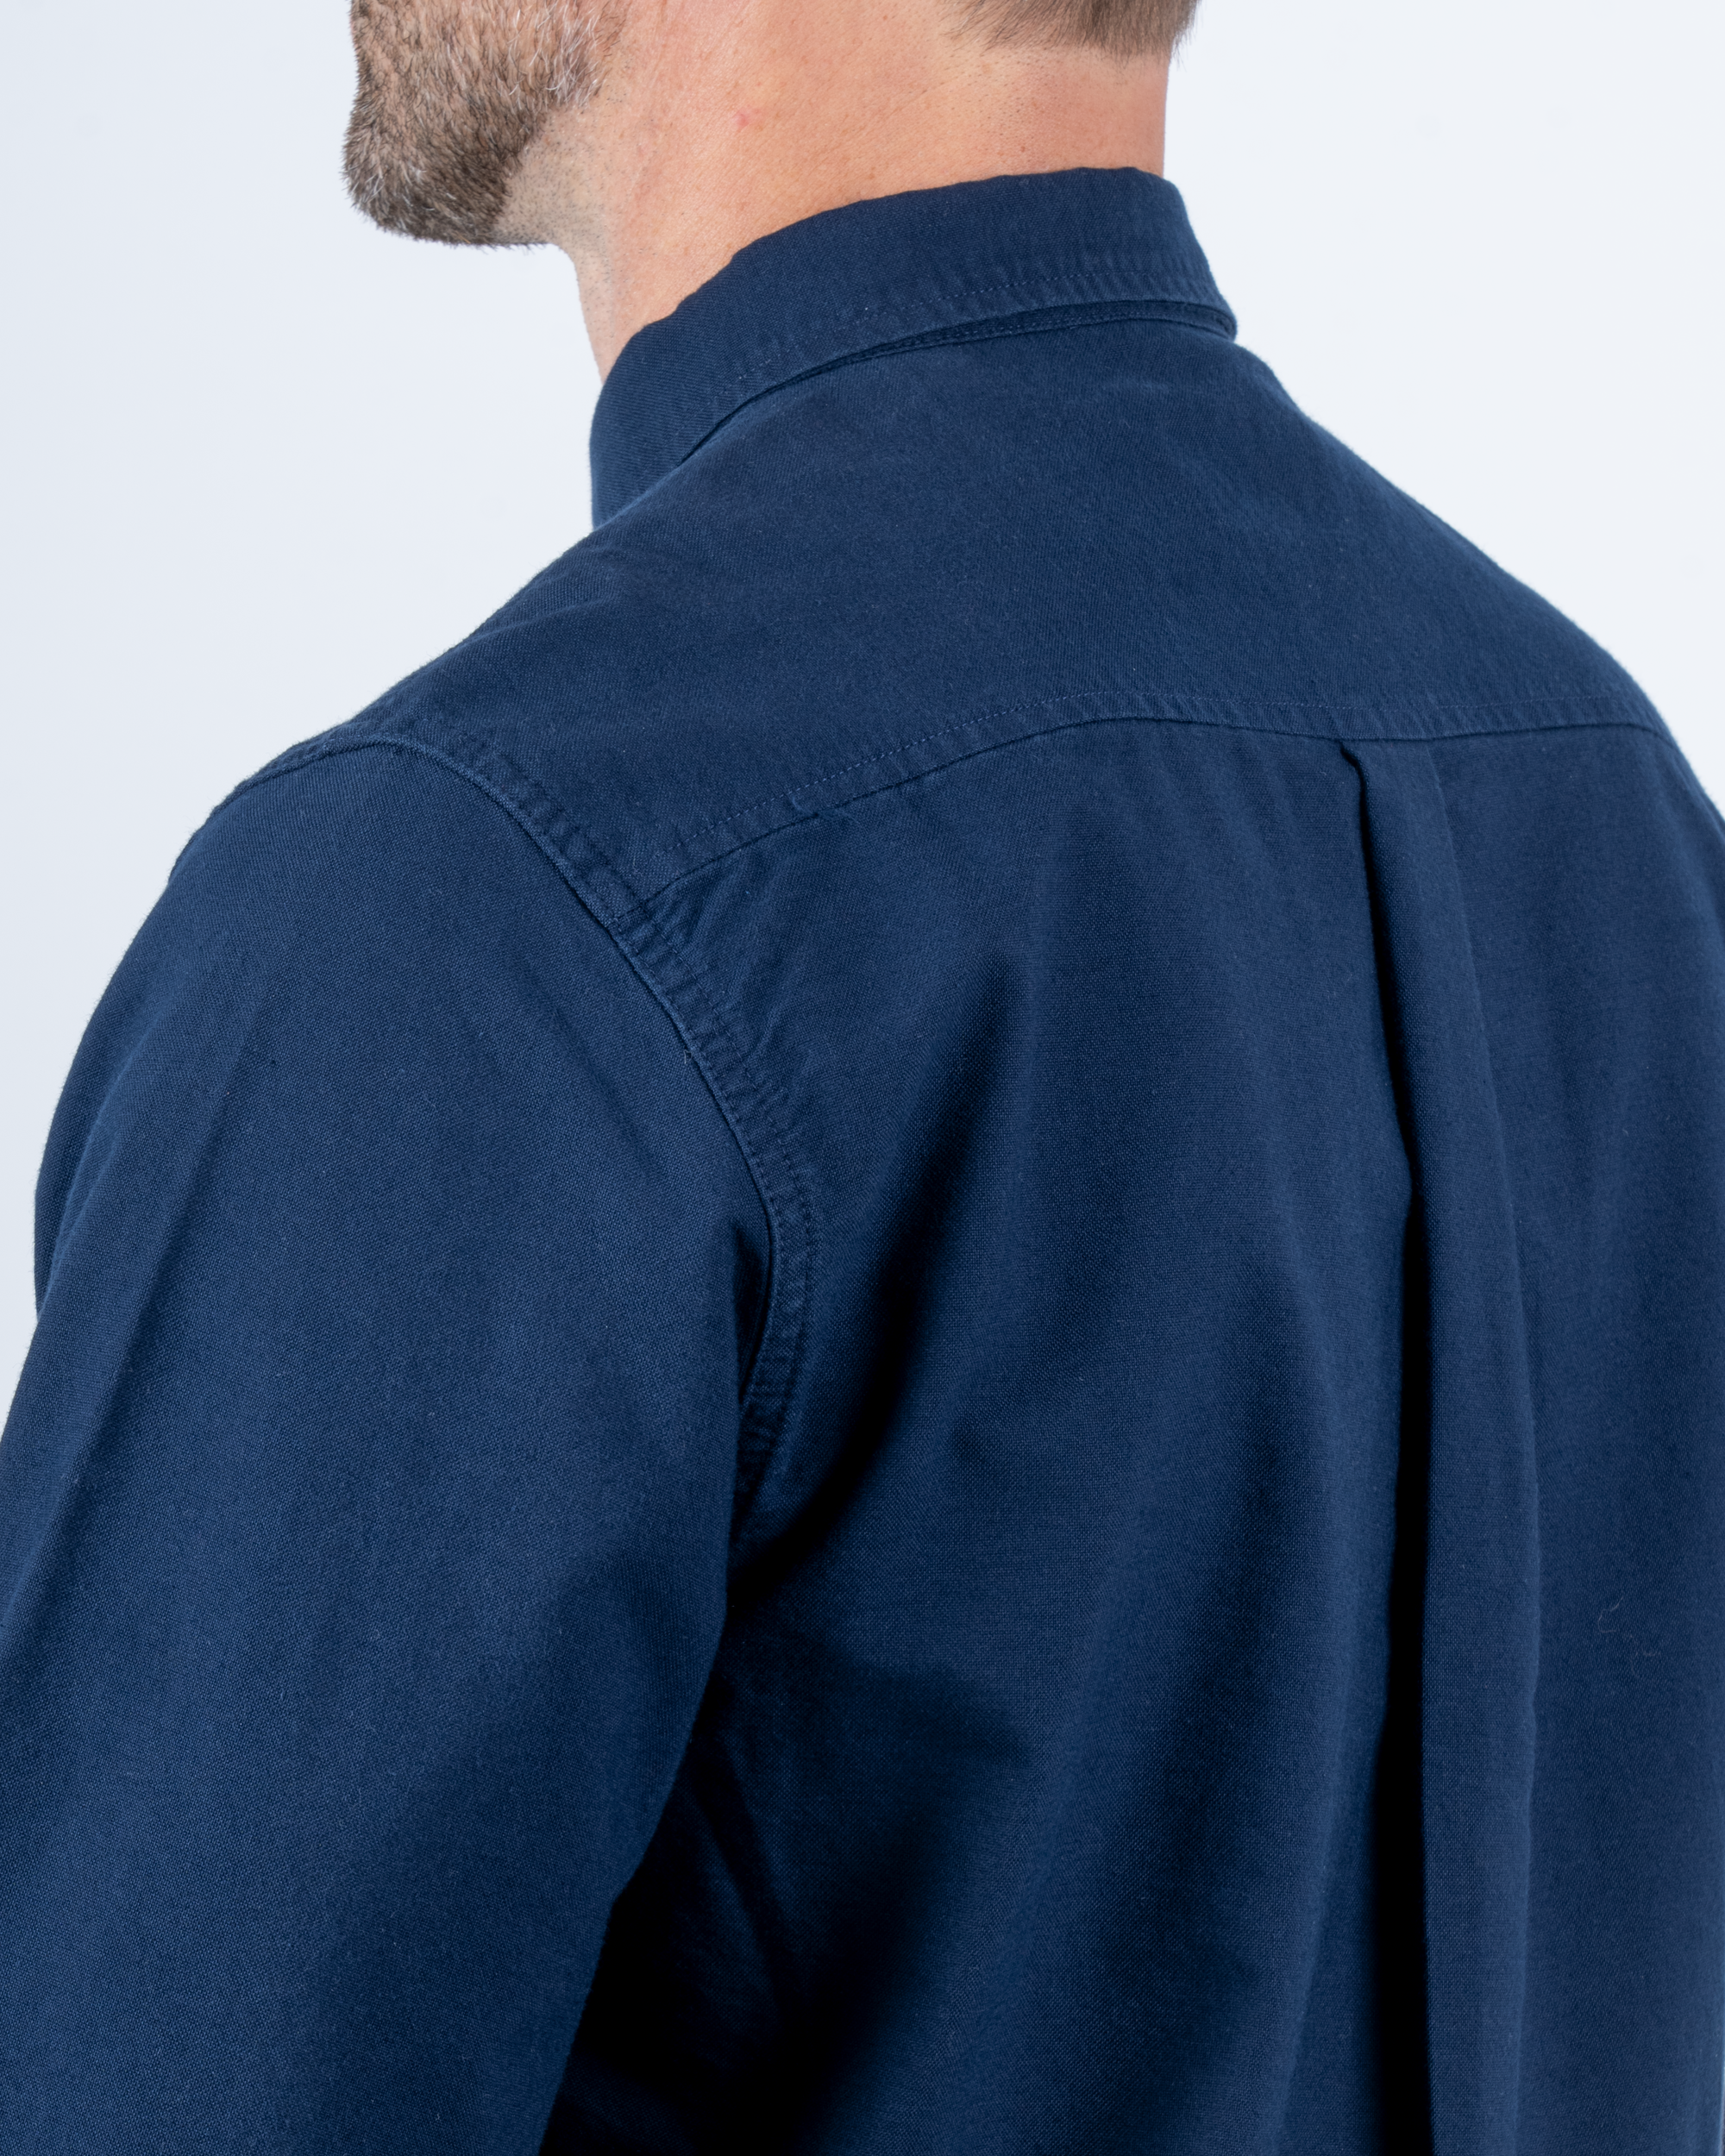 Foreign Rider Co Organic Cotton Navy Utility Button Down Oxford Back Shoulder and Neck Detail